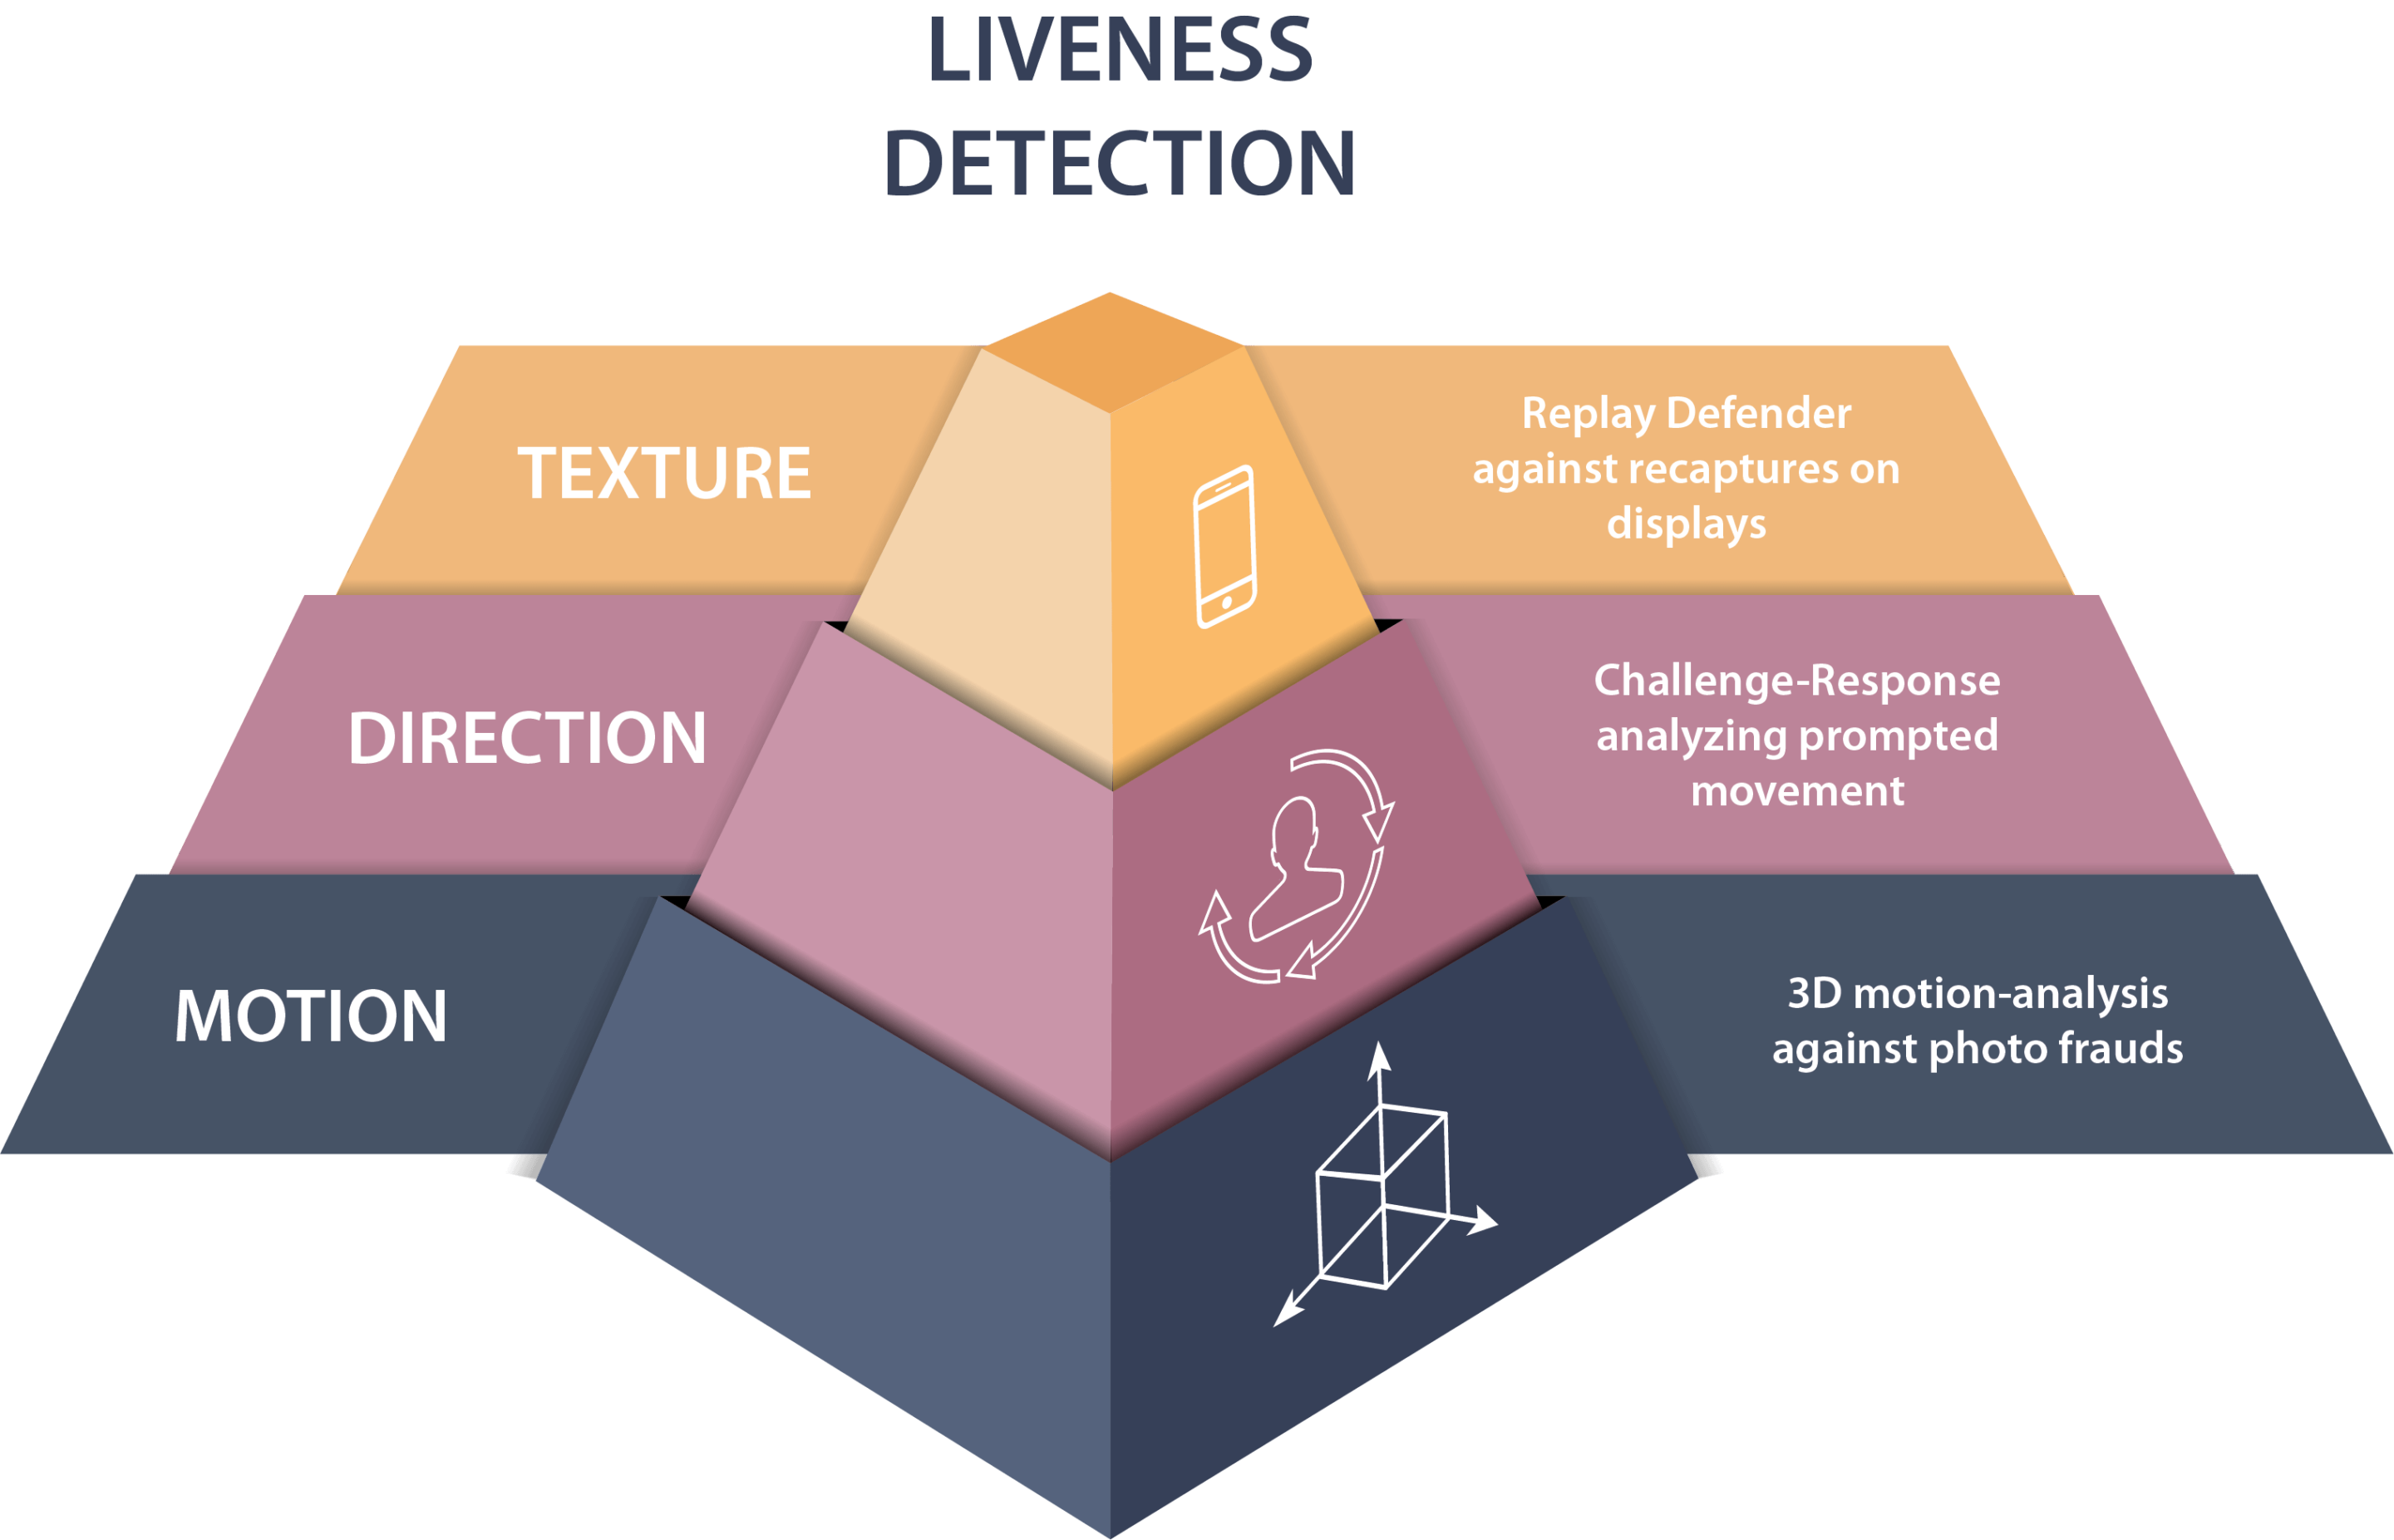 Patented Presentation Lifeness Detection Pyramid for Biometric Anti-Spoofing